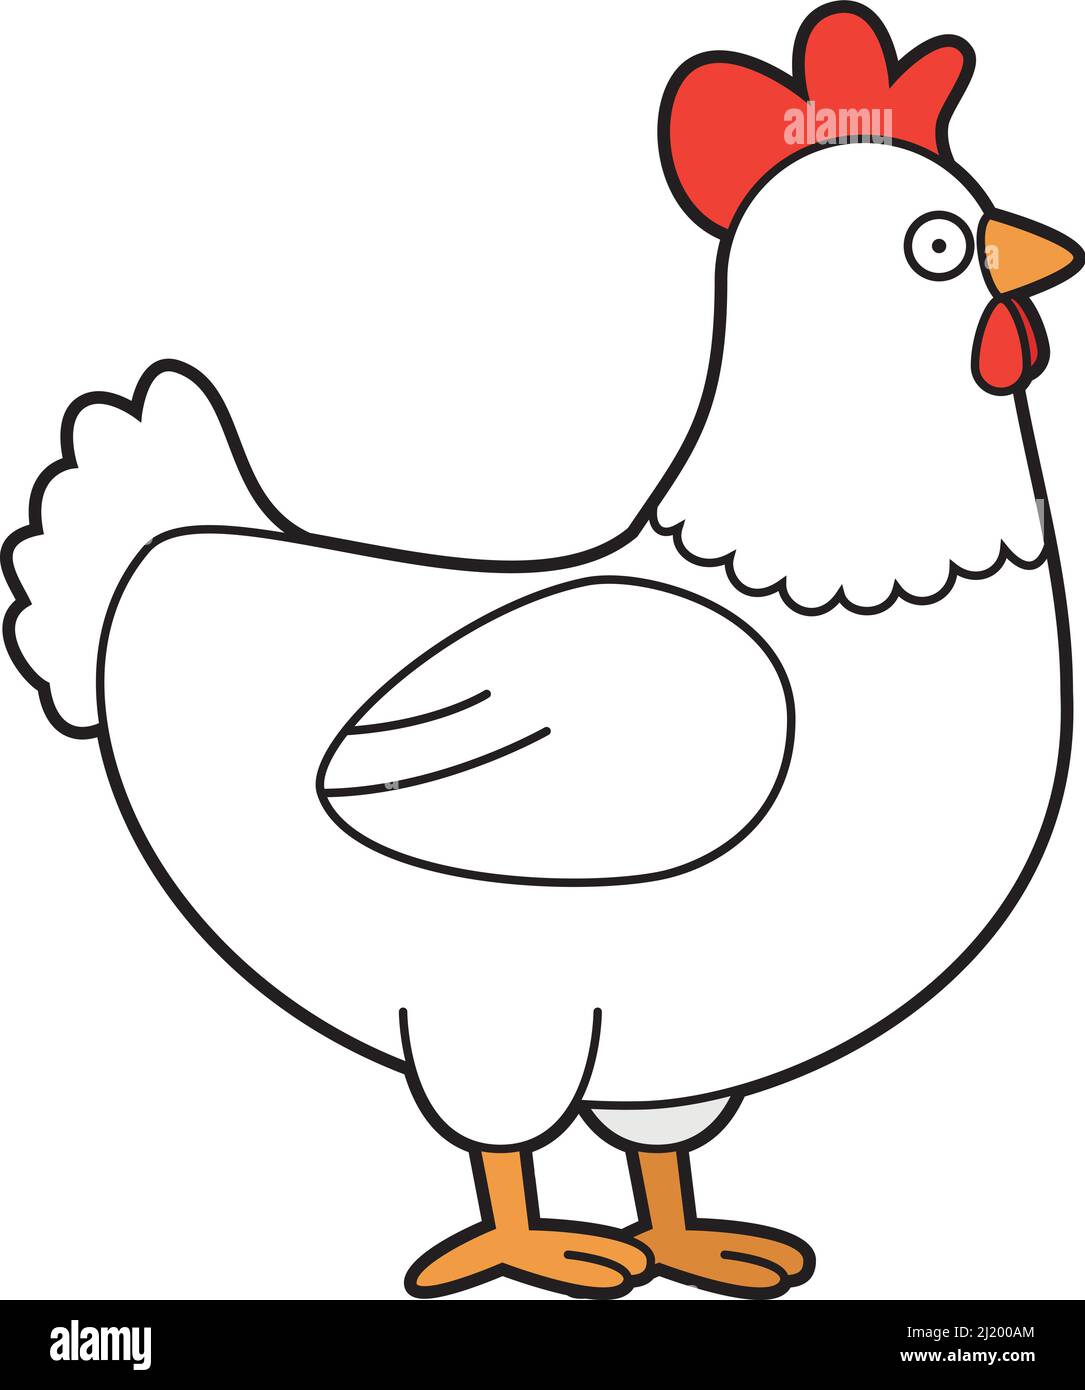 277 Chicken Drawing Easy Cute Royalty-Free Photos and Stock Images |  Shutterstock